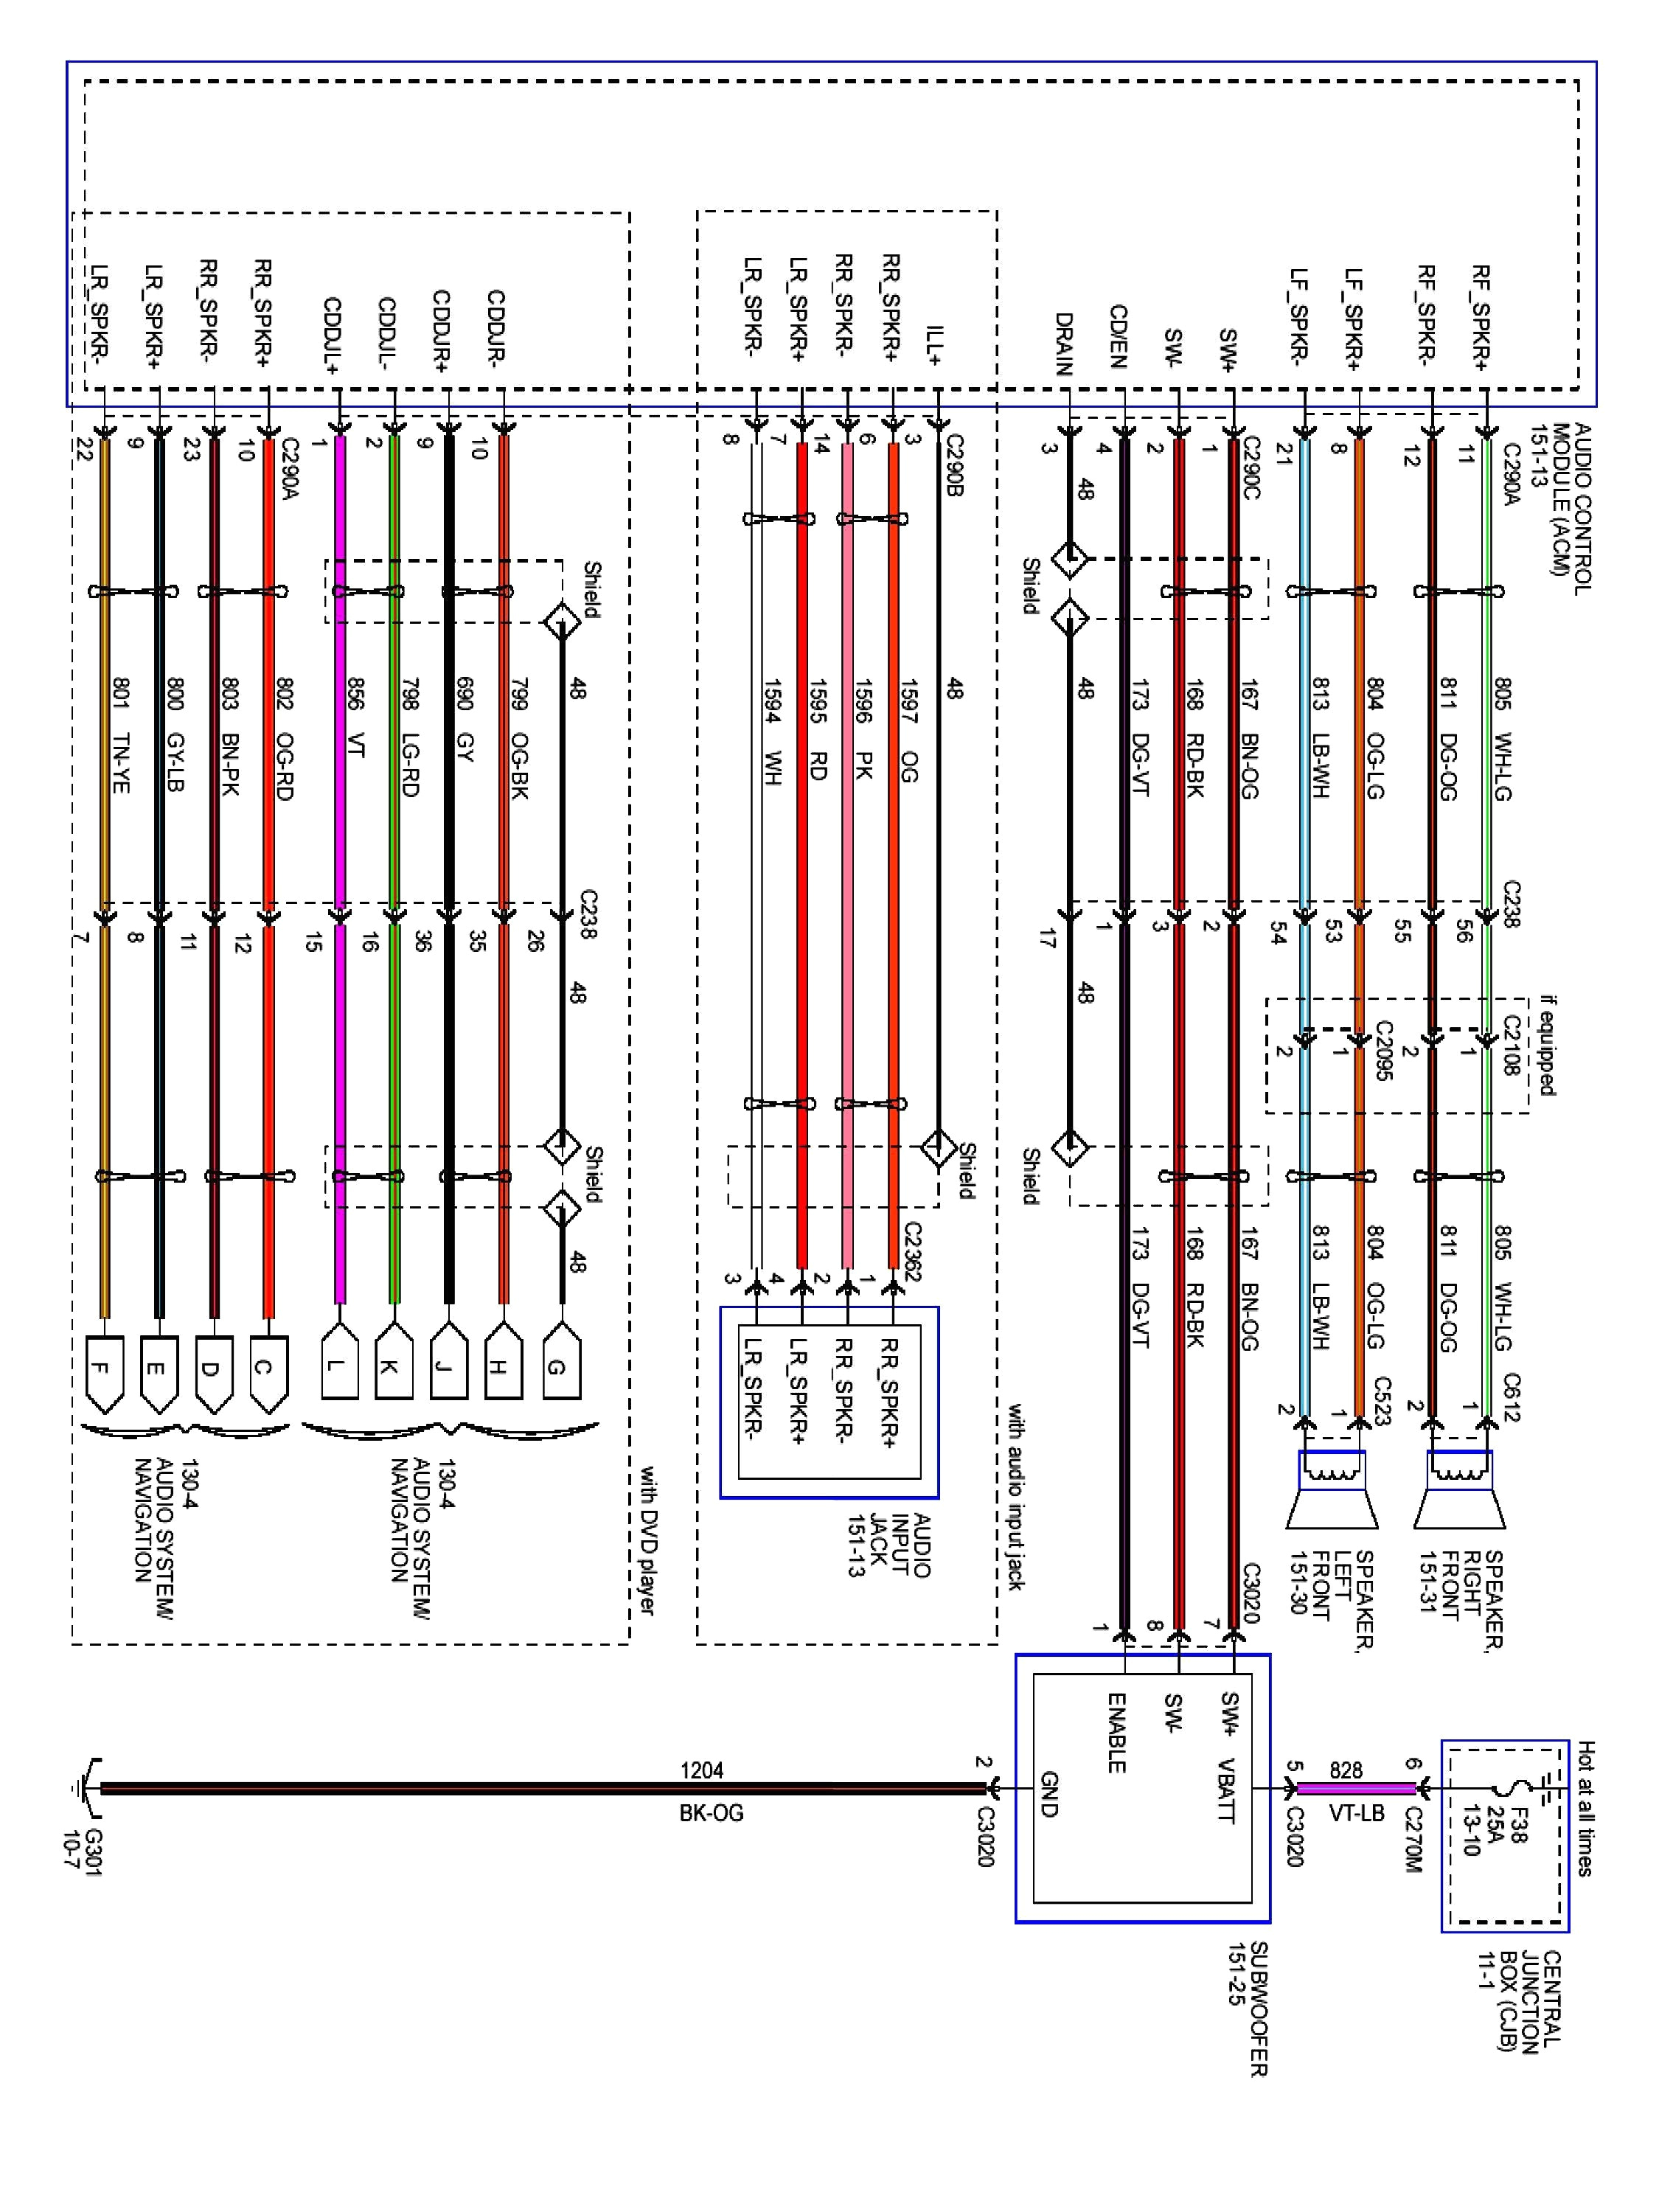 93 ford f 150 stereo wiring harness wiring diagram database 93 f350 wiring diagram